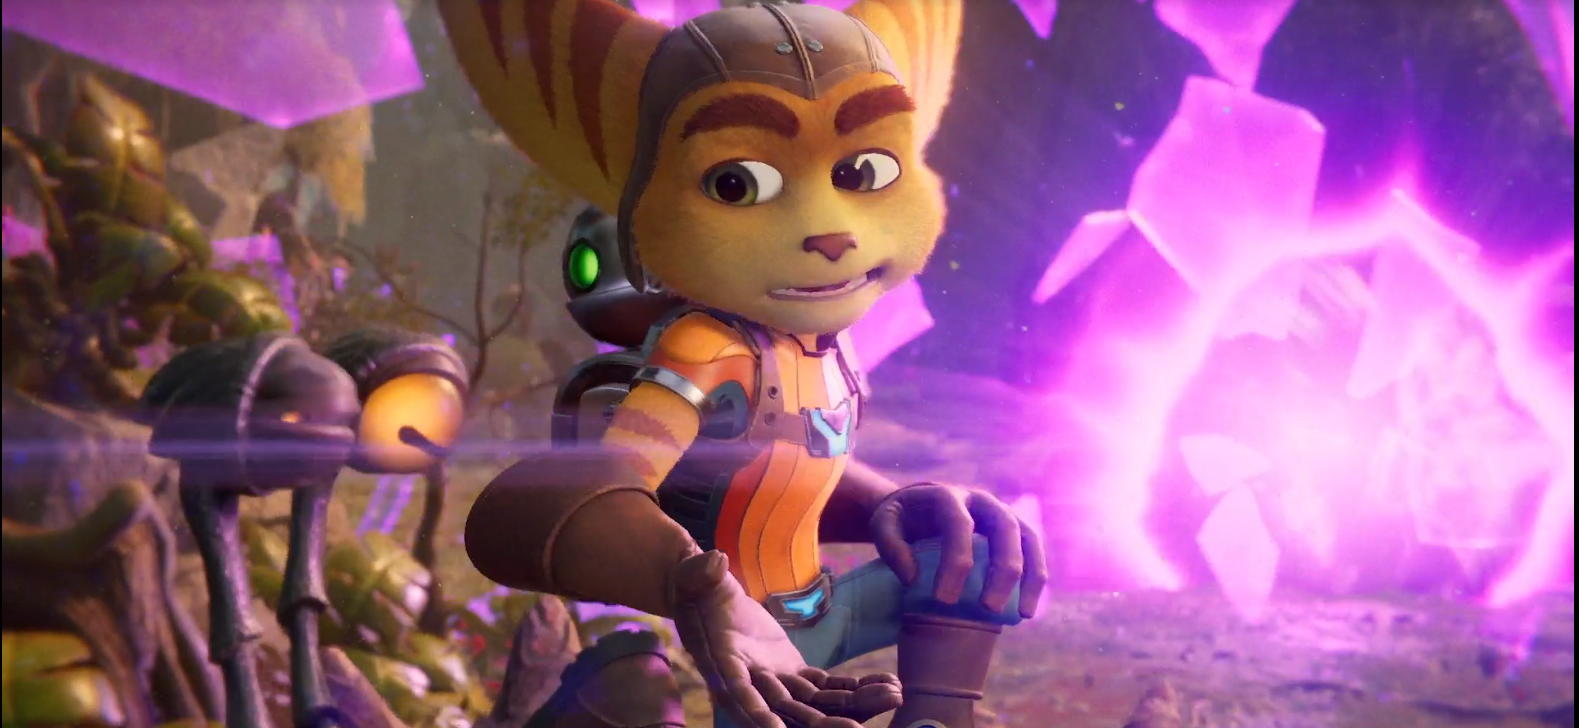 ratchet and clank movie trailer